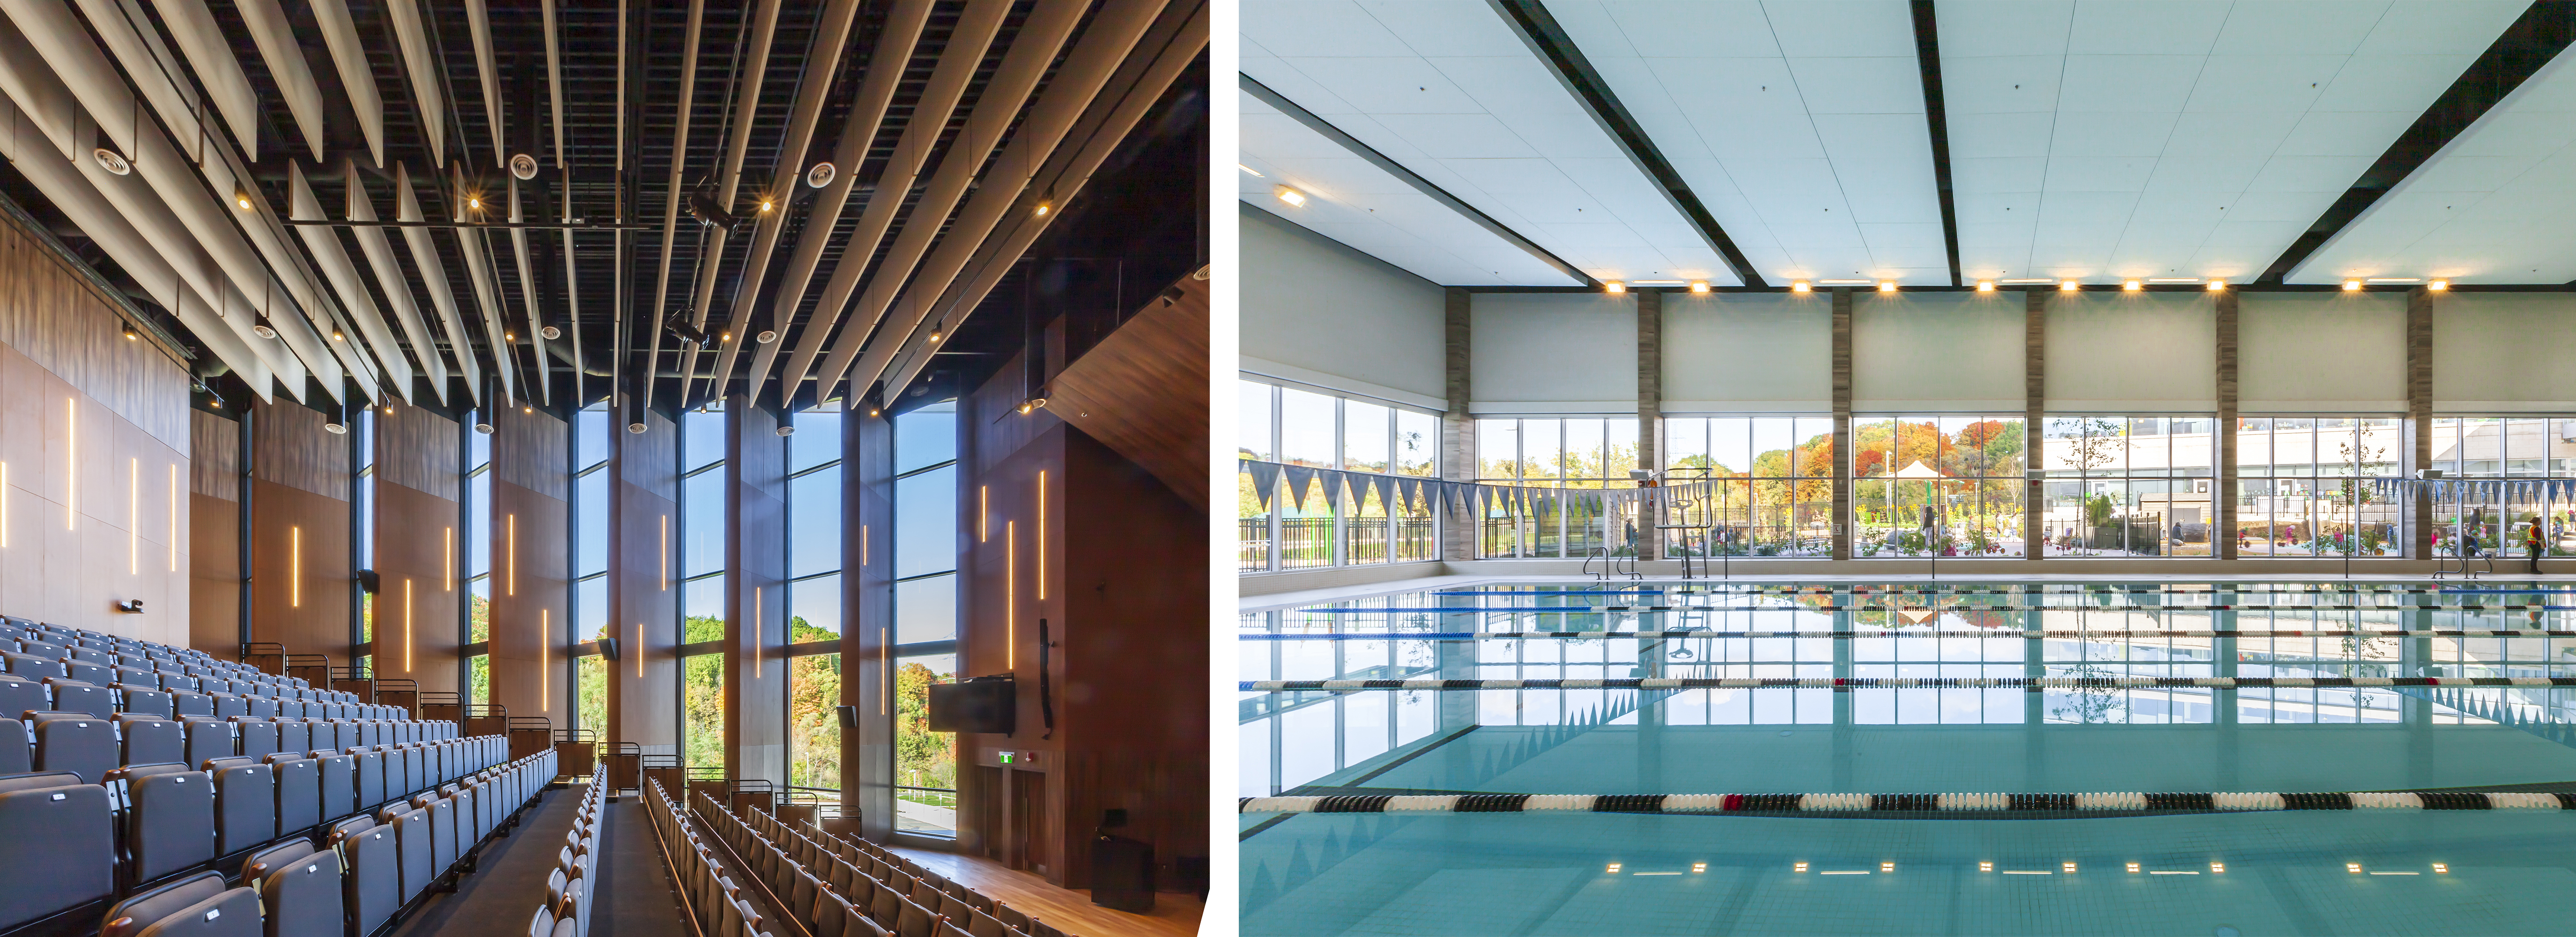 Left: Raked theatre seating with wooden interior surfaces and large angled windows in the background. Right: Large indoor swimming pool surrounded by curtain wall windows.										